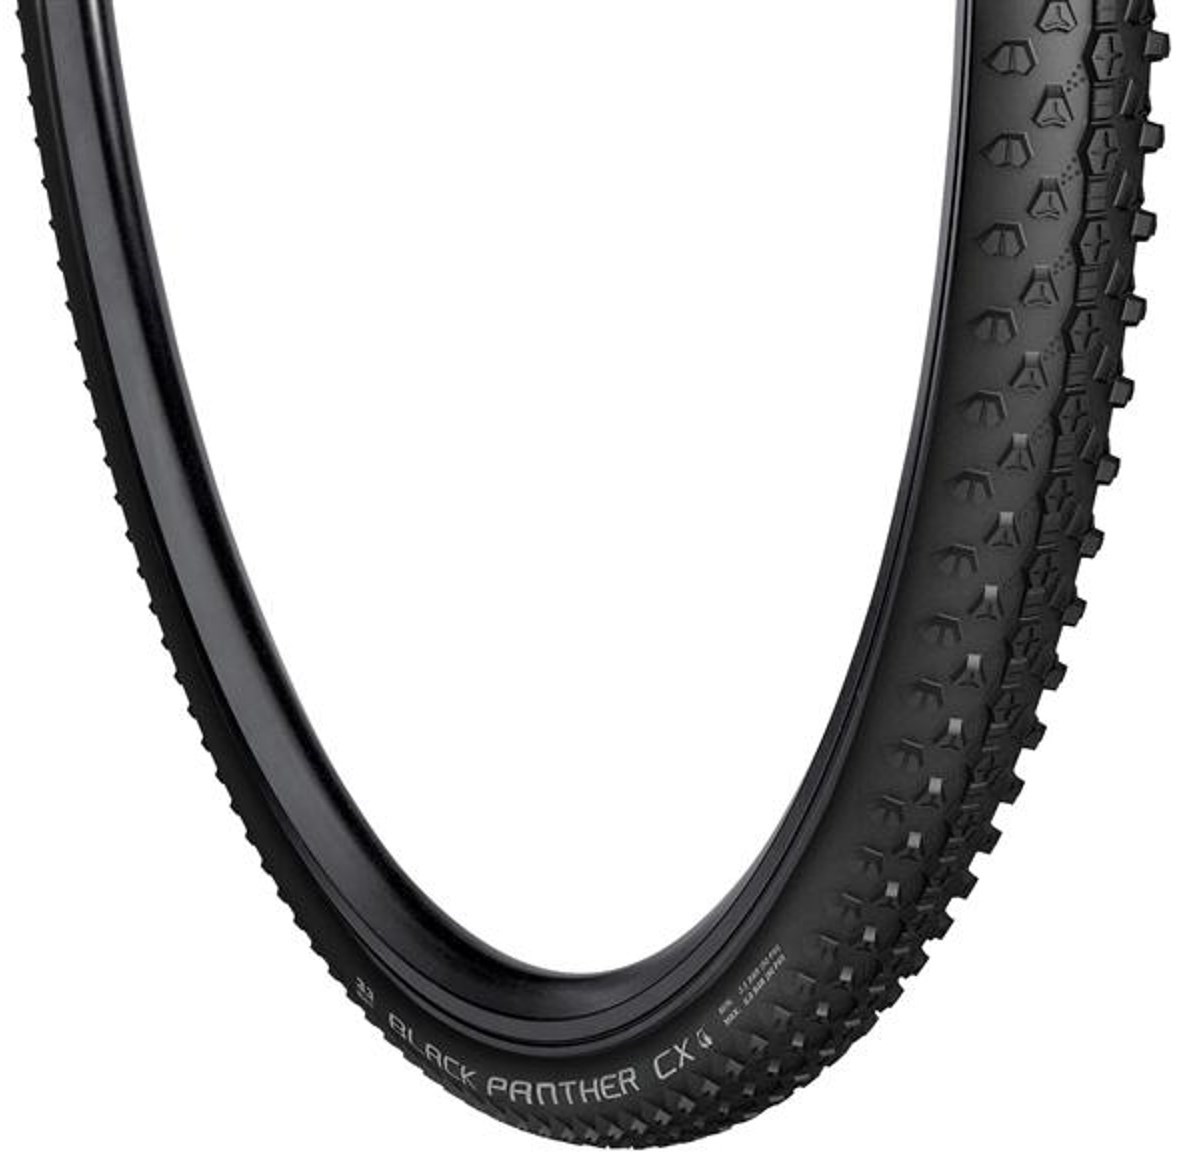 Vredestein Black Panther CX Cyclocross Tyre product image